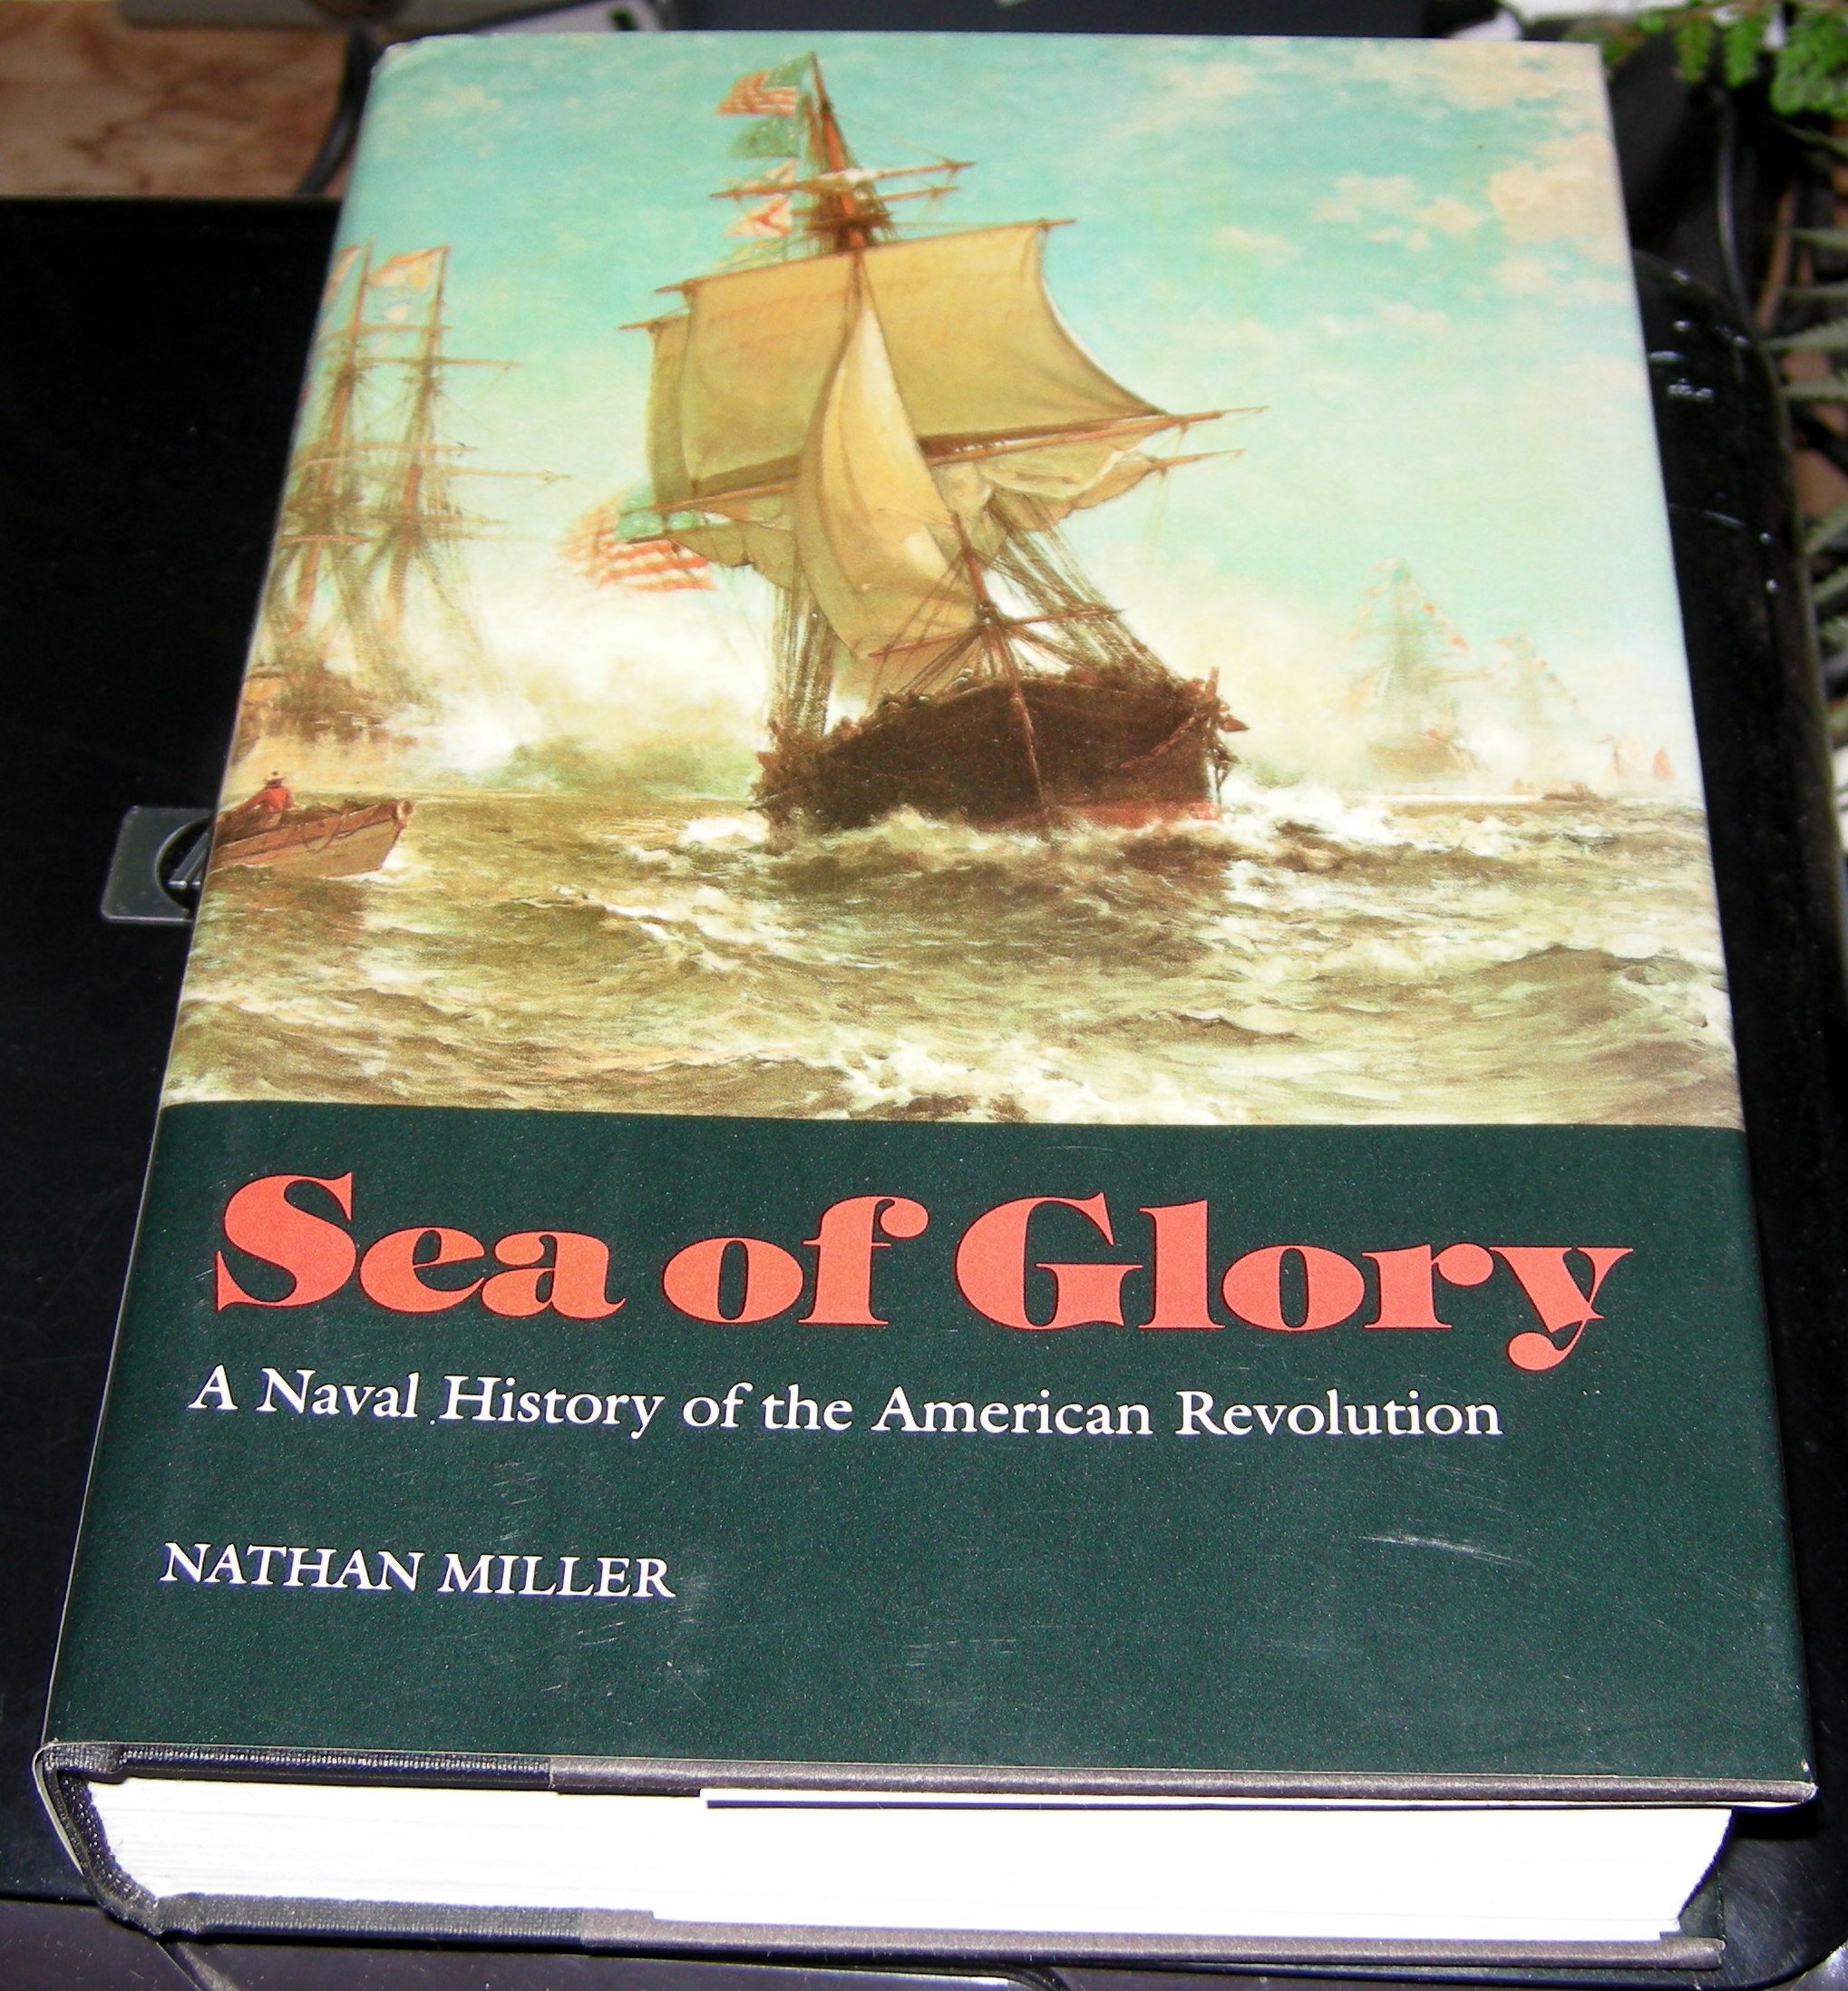 Sea of Glory: A Naval History of the American Revolution